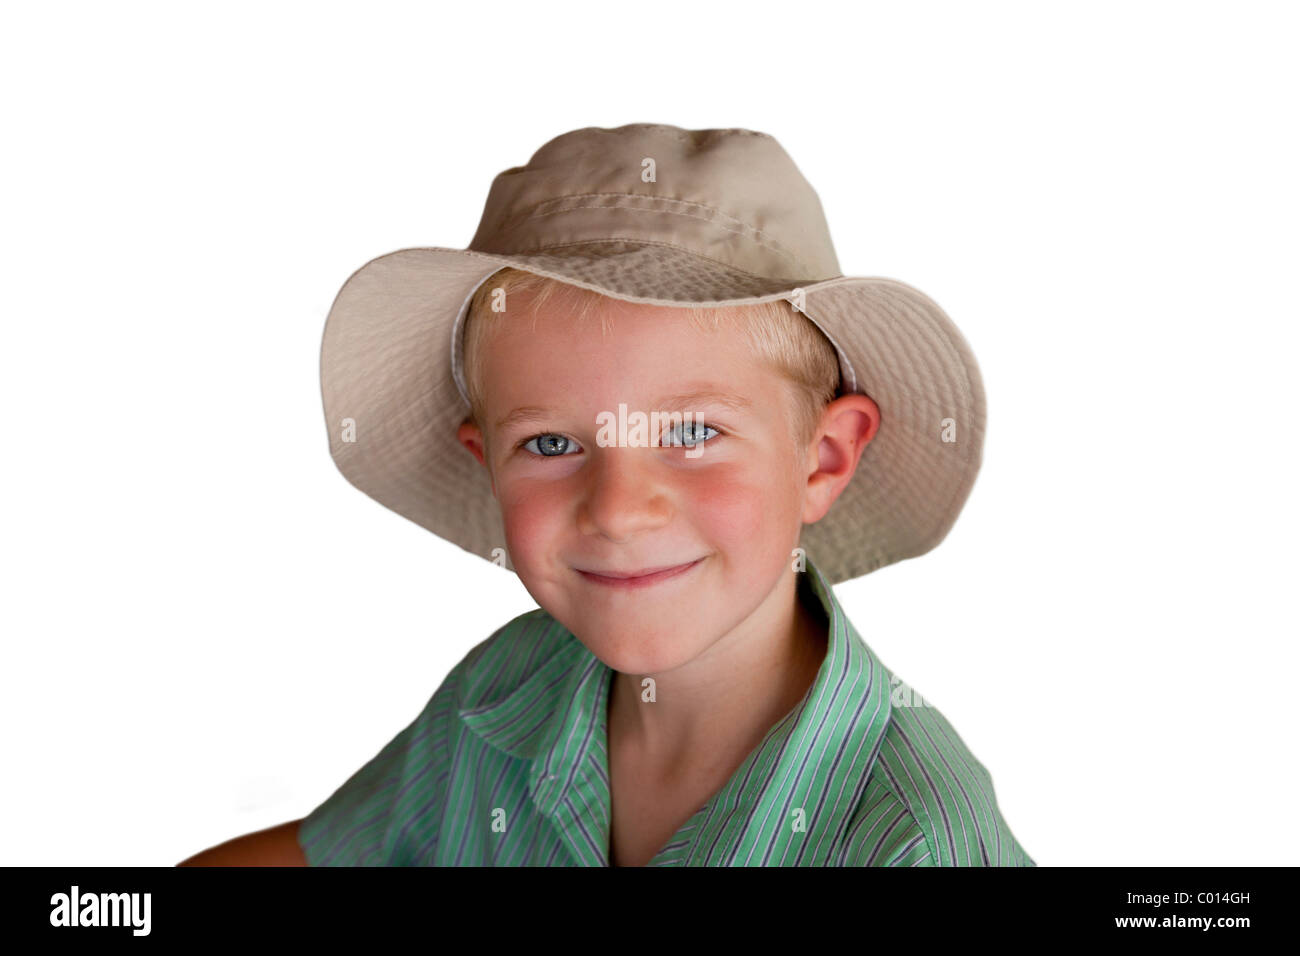 Boy, 7 years, with hat, portrait Stock Photo